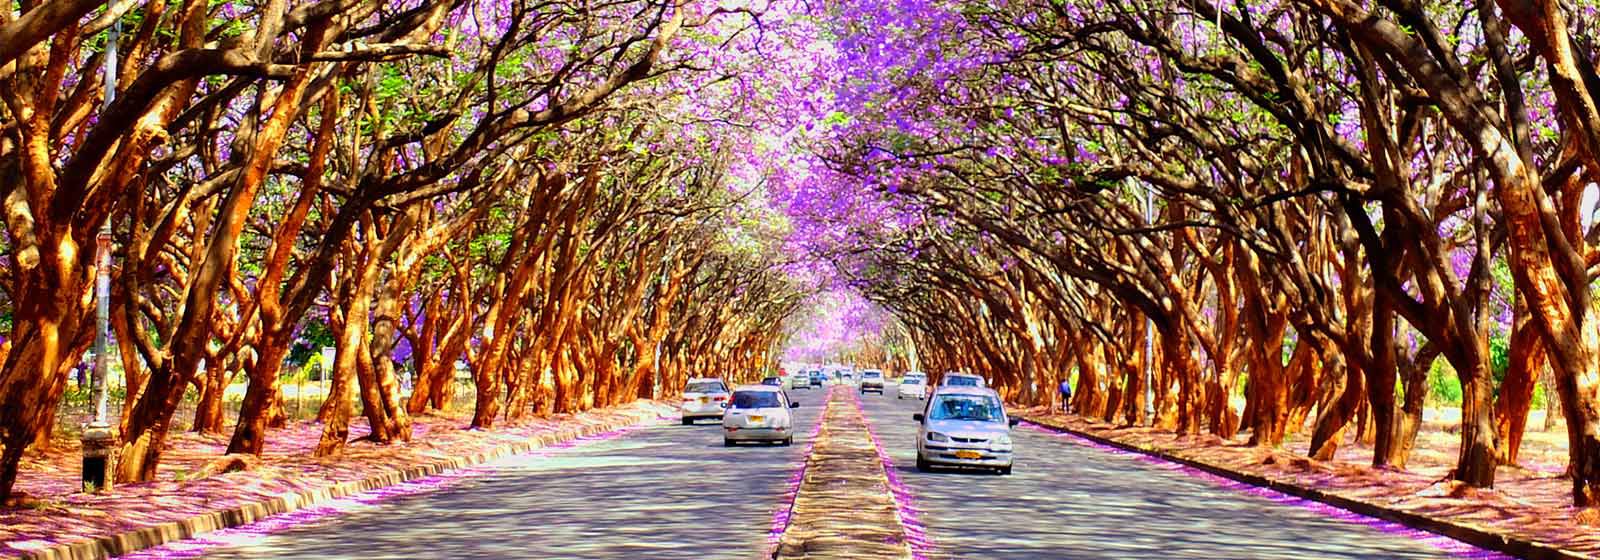 Road with purple blossomed trees lining it